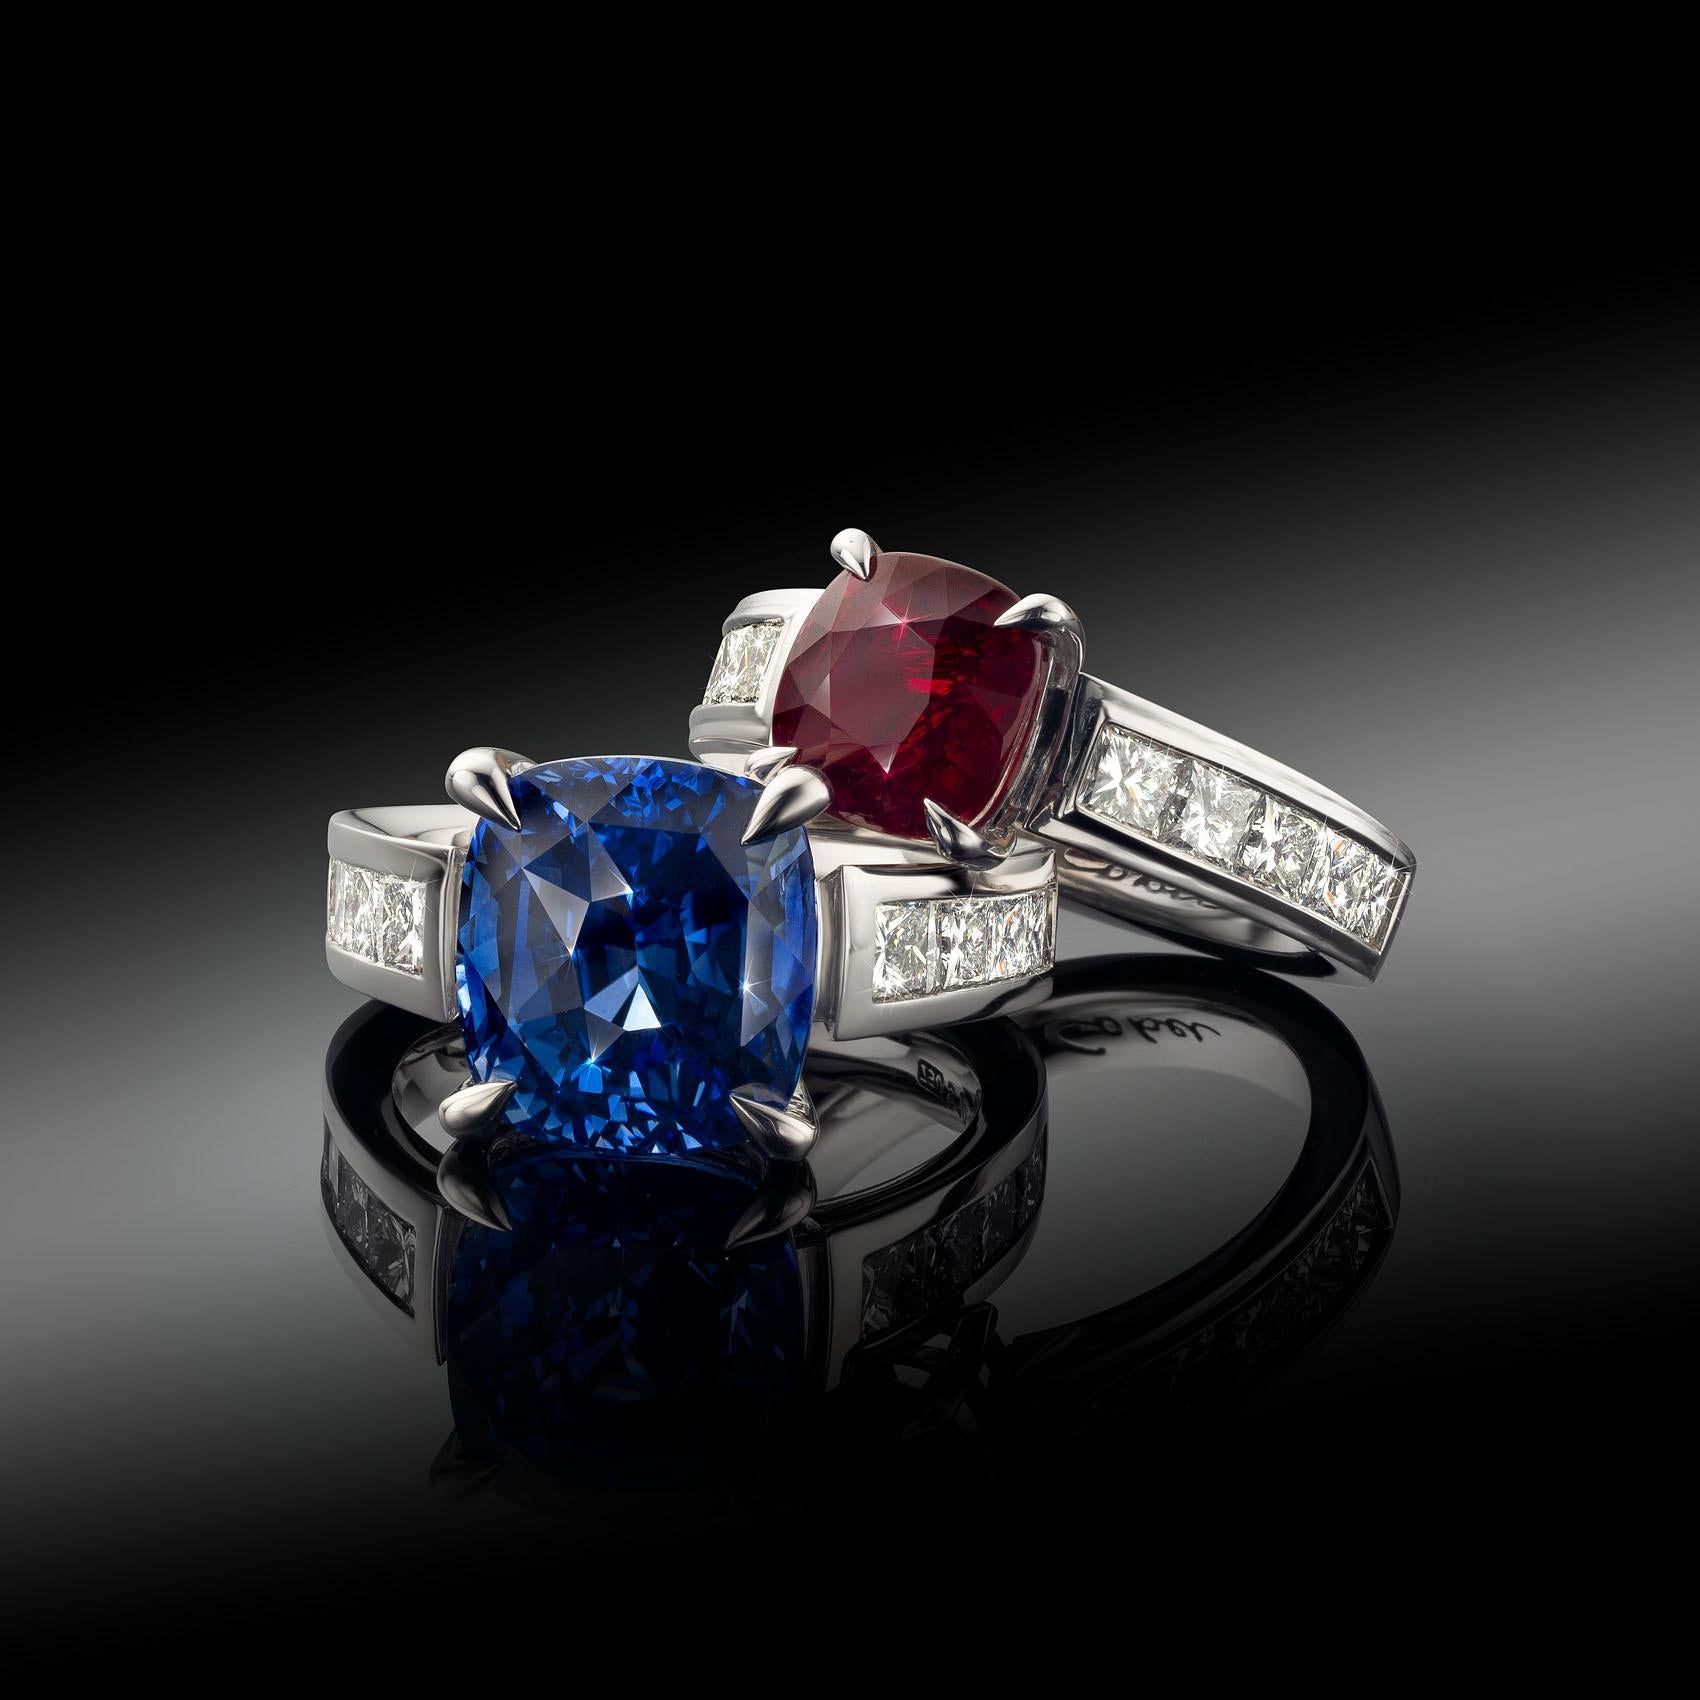 For Sale:  Cober Jewellery with 3.03 Carat Ruby  1.60 Carat total Diamonds White Gold Ring  12